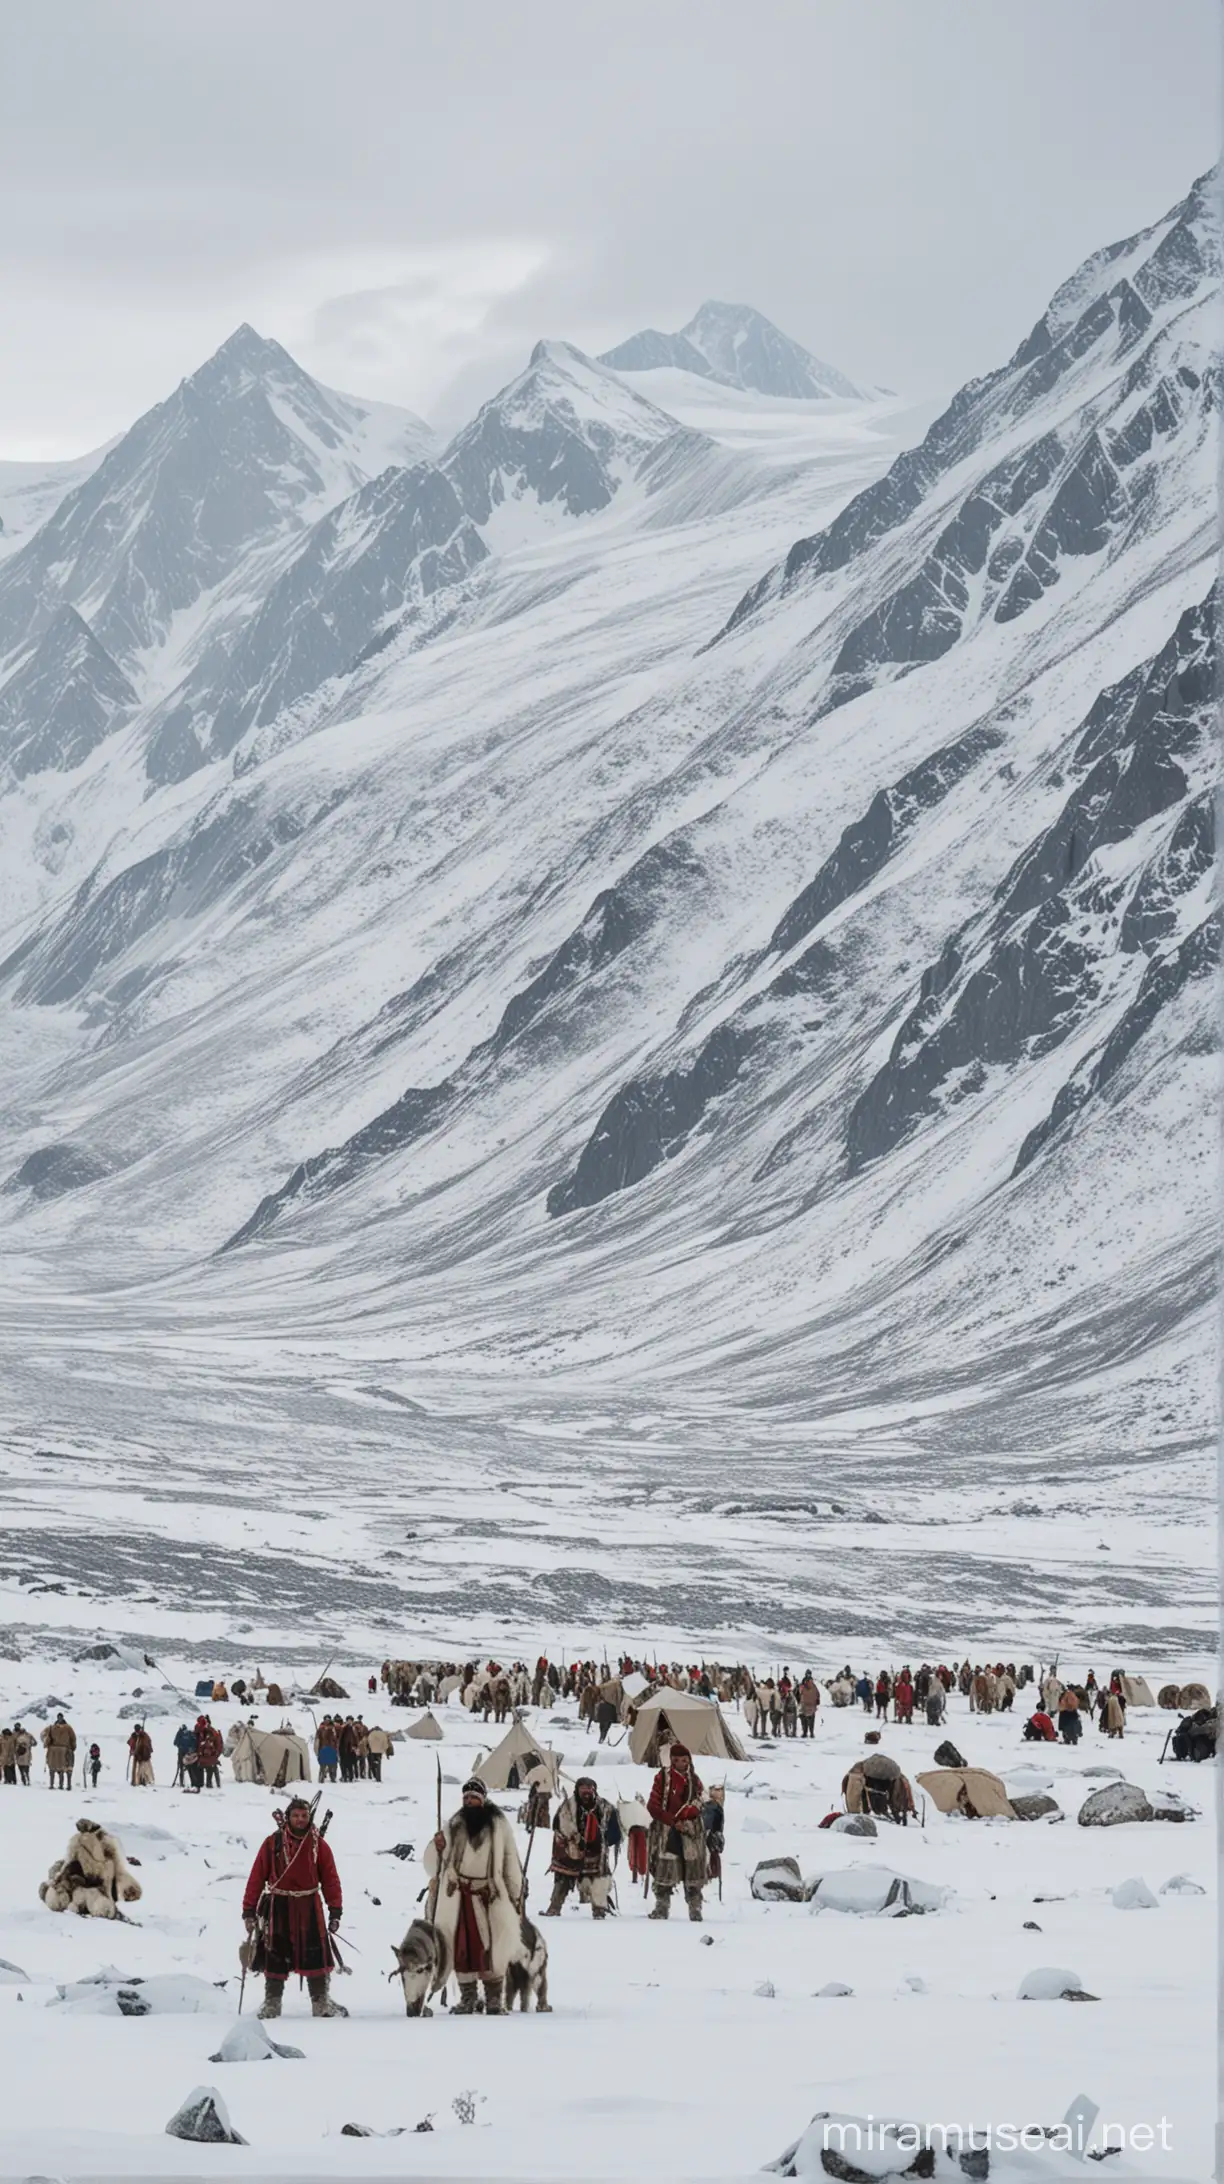 Amidst the snow-covered mountains, members of the tribe residing in the Chukchi Peninsula are seen preparing for hunting in their traditional attire. A stark backdrop of white landscape and glaciers is evident behind them.

